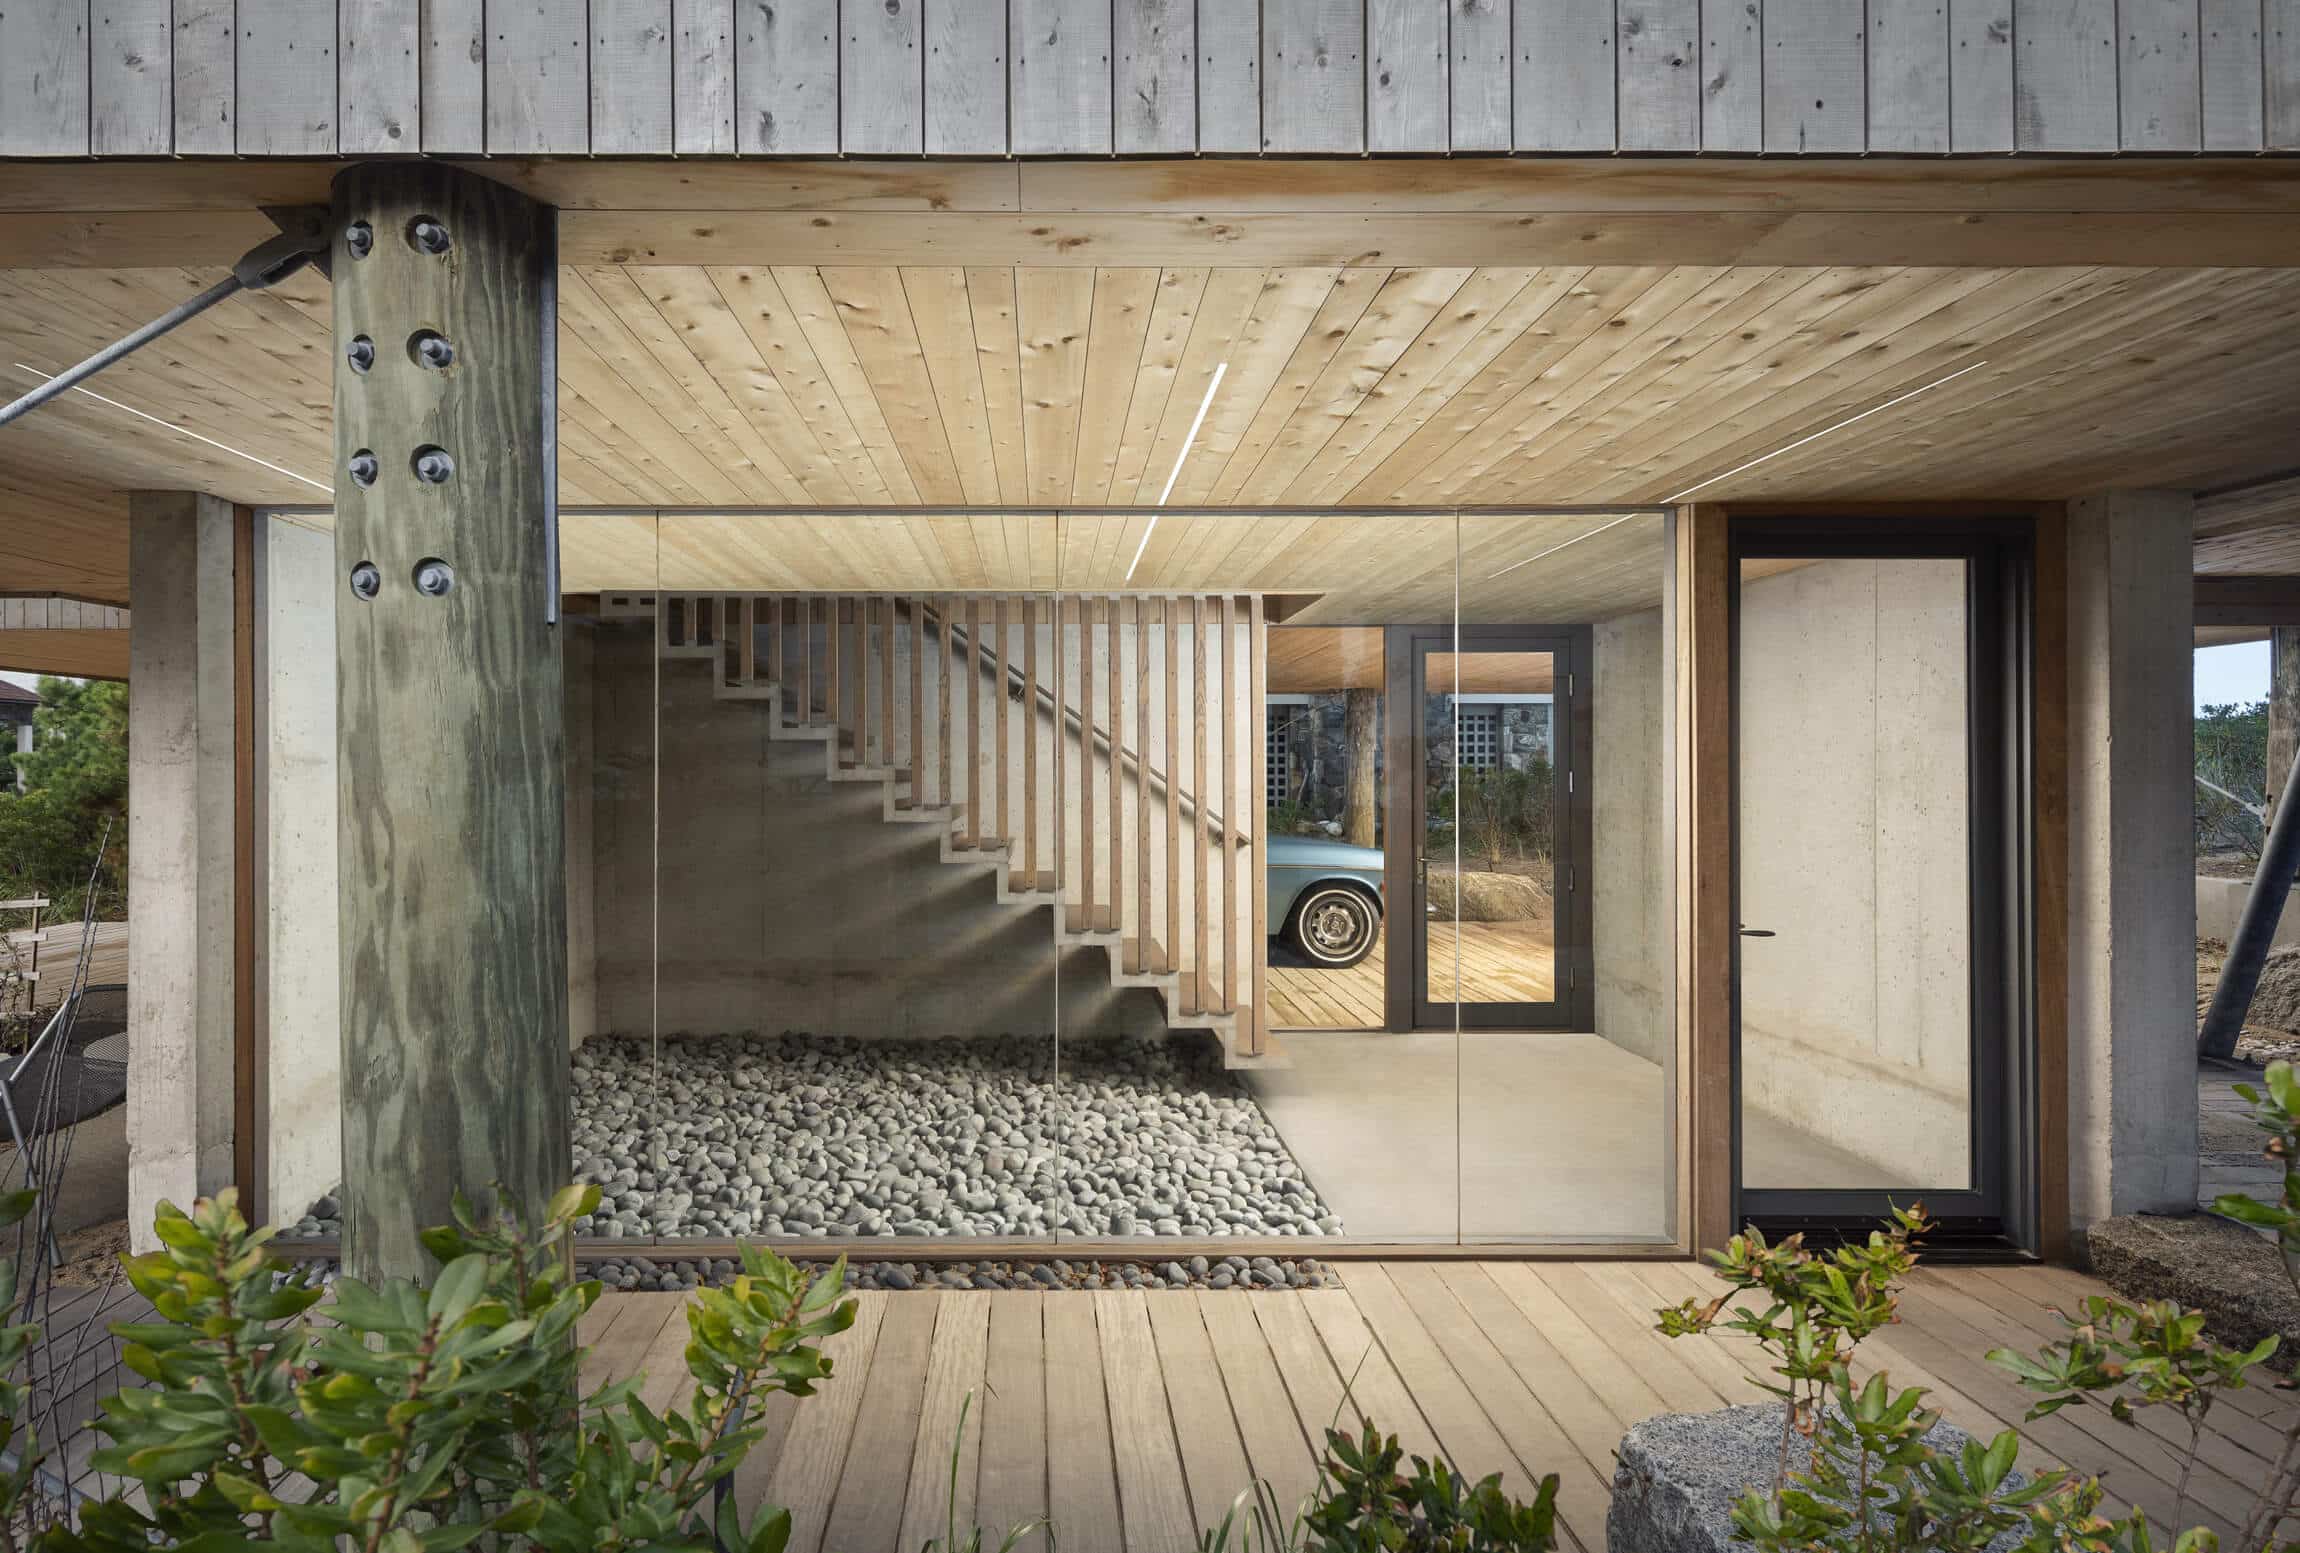 In the dunes entry way with a wood walkway, large glass windows, and a stairway leading up into the home